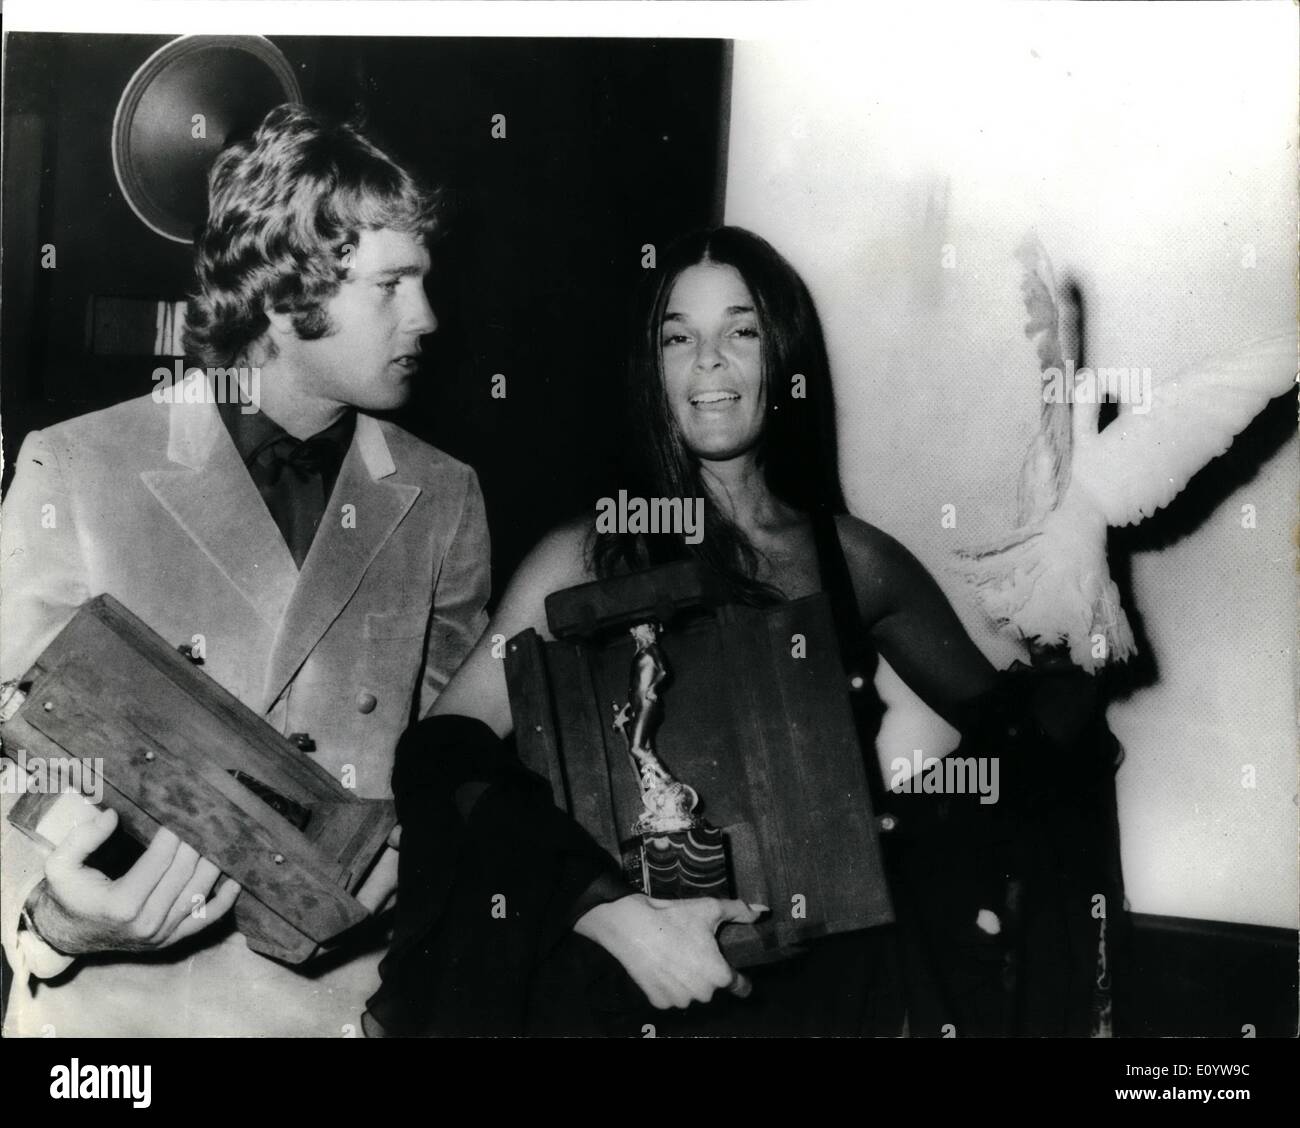 Jul. 07, 1971 - David of Donatello Film Awards: Ali Macgraw and Ryan O'Neill, stars of the film ''Love Story'' - pictured with their trophies after the David of Donatello Film Awards presentation ceremony in Rome. The event, to raise funds for the restoration of art treasures in the ''Sucola Grande Di San Marco in Venice was planned to put Italy in stop with other nations that have generously arranged benefits to aid the dying lagoon city. Stock Photo